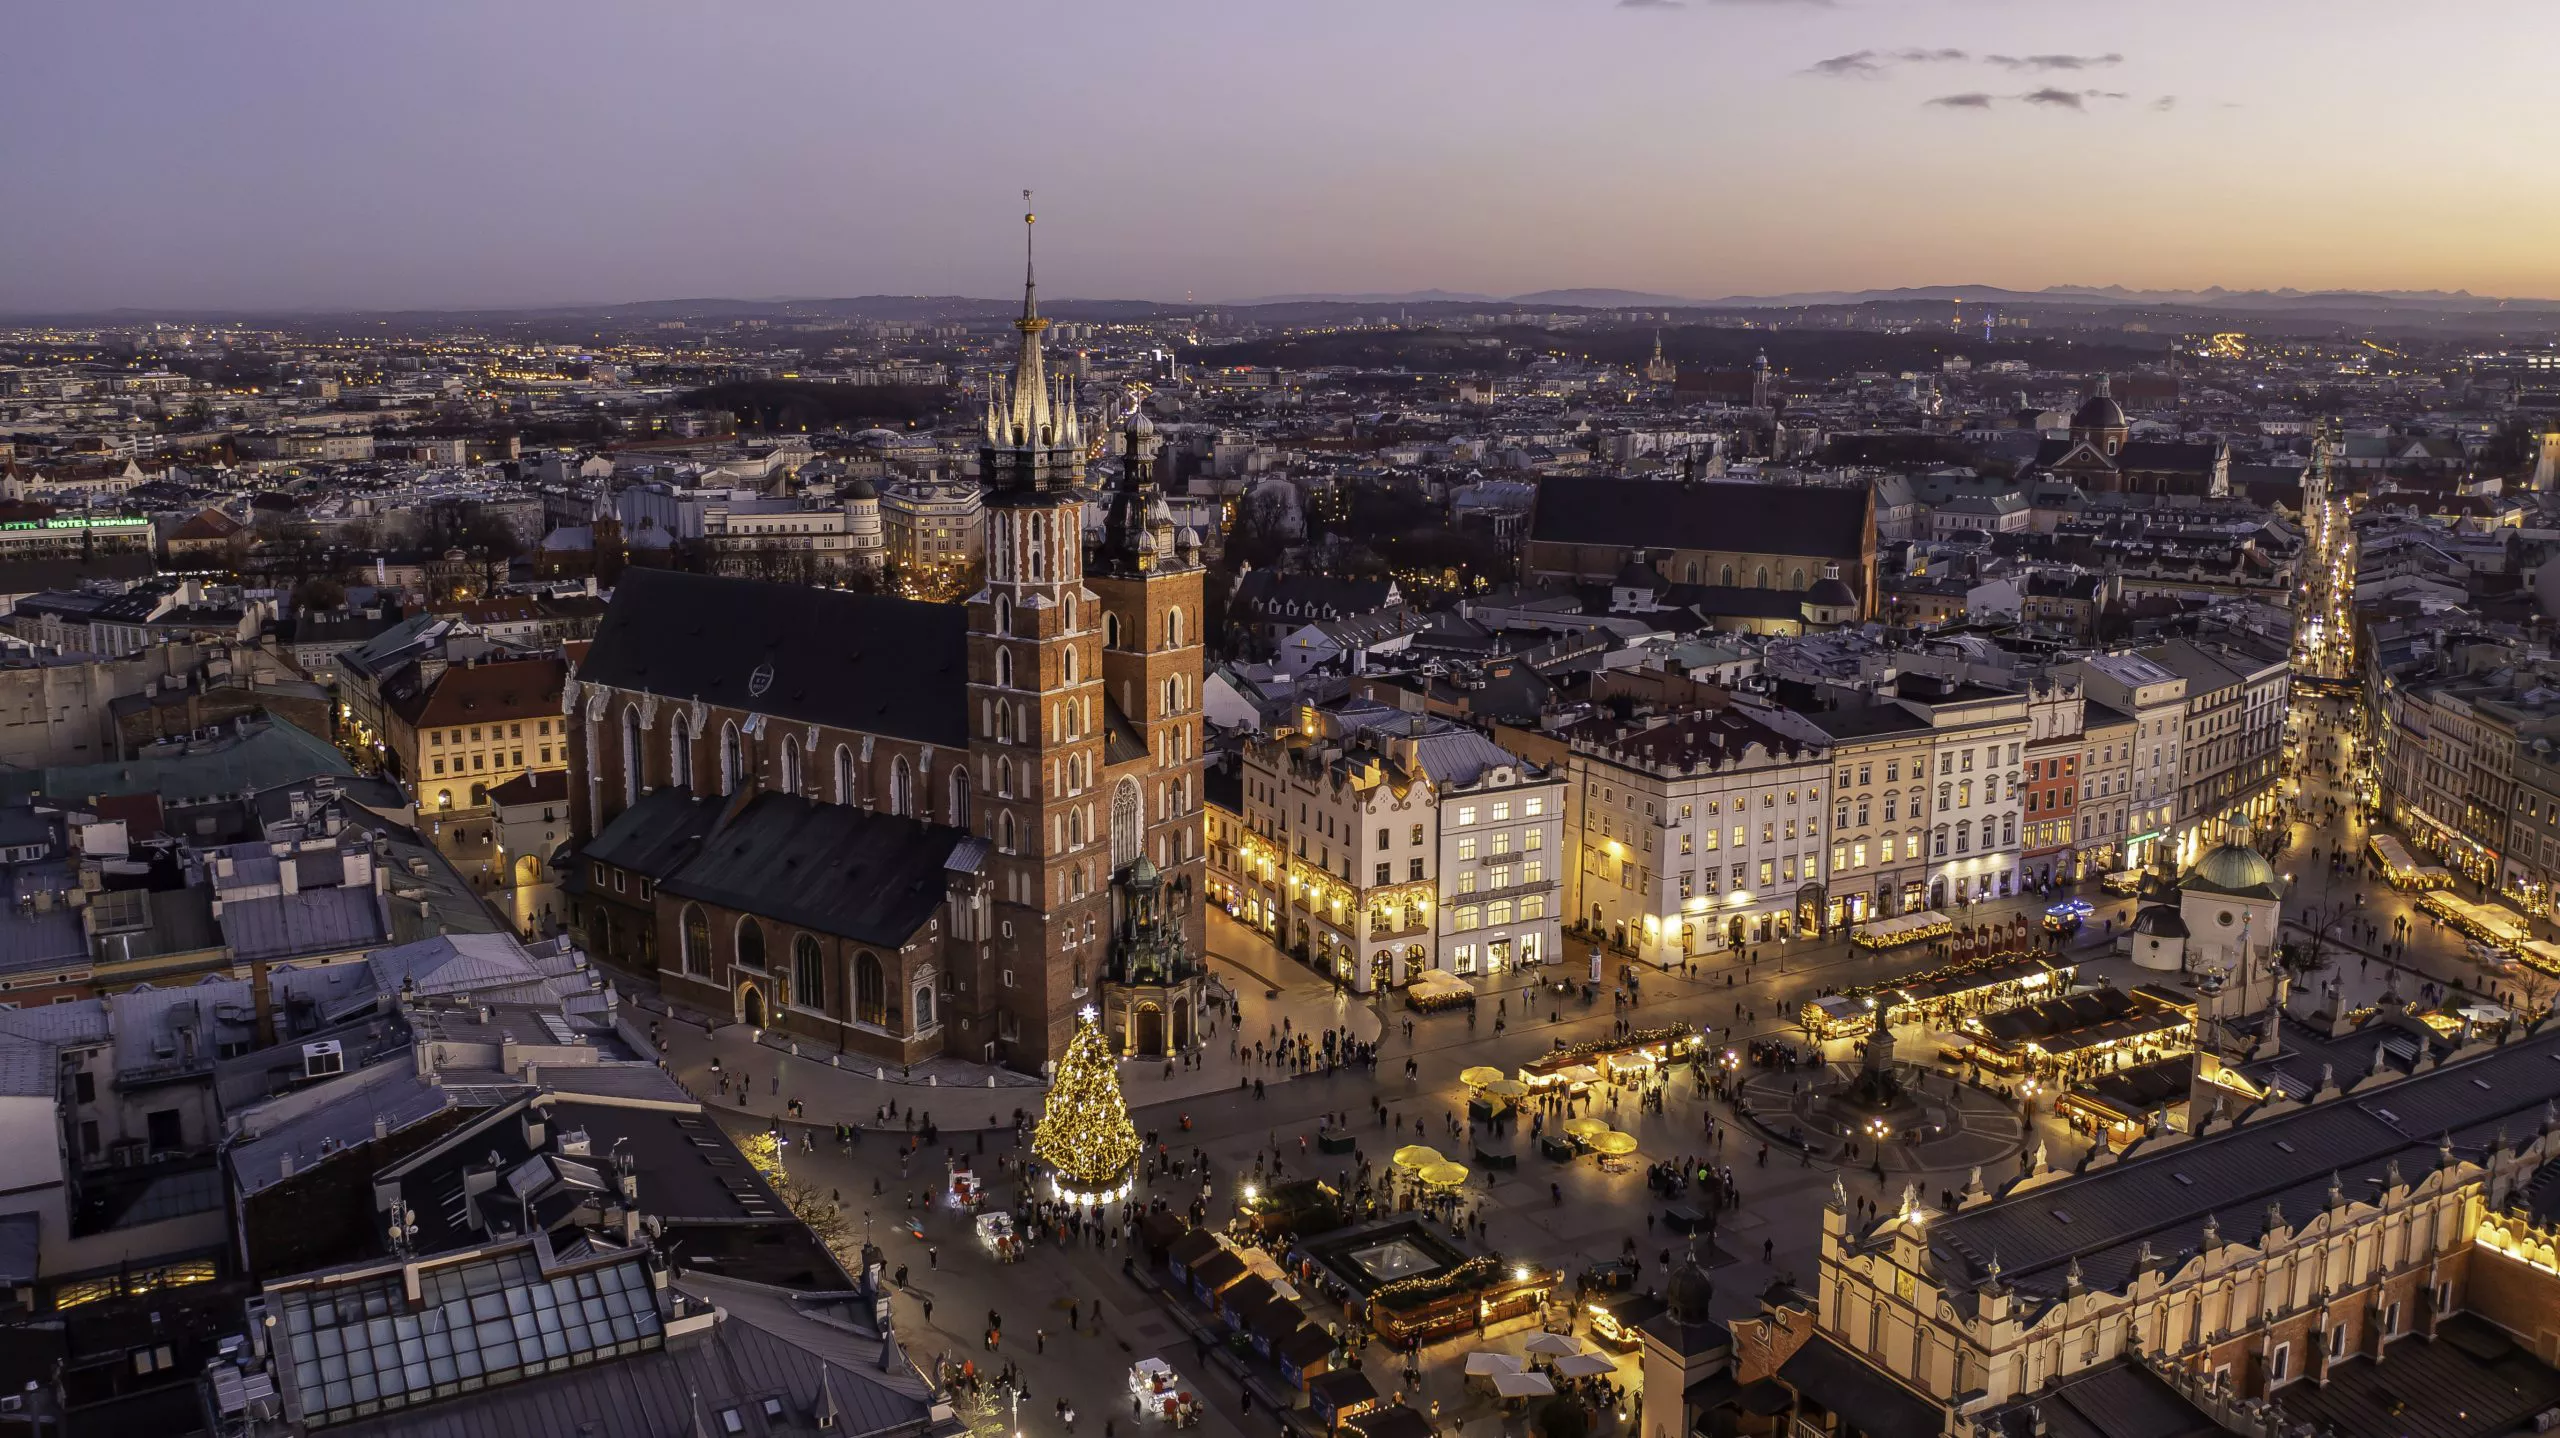 The eastern half of the artificially lit Main Market Square proudly demonstrates its Christmas lighting at pre-dusk. The bottom left-hand corner is taken by the roof of the Cloth Hall. A tall Christmas tree is standing to its left in front of the uneven-towered St Mary’s Church. A large expanse of the city spreads behind a line of bright façades of Main Market Square mansion to its right, reaching the horizon behind which the Sun has just set.